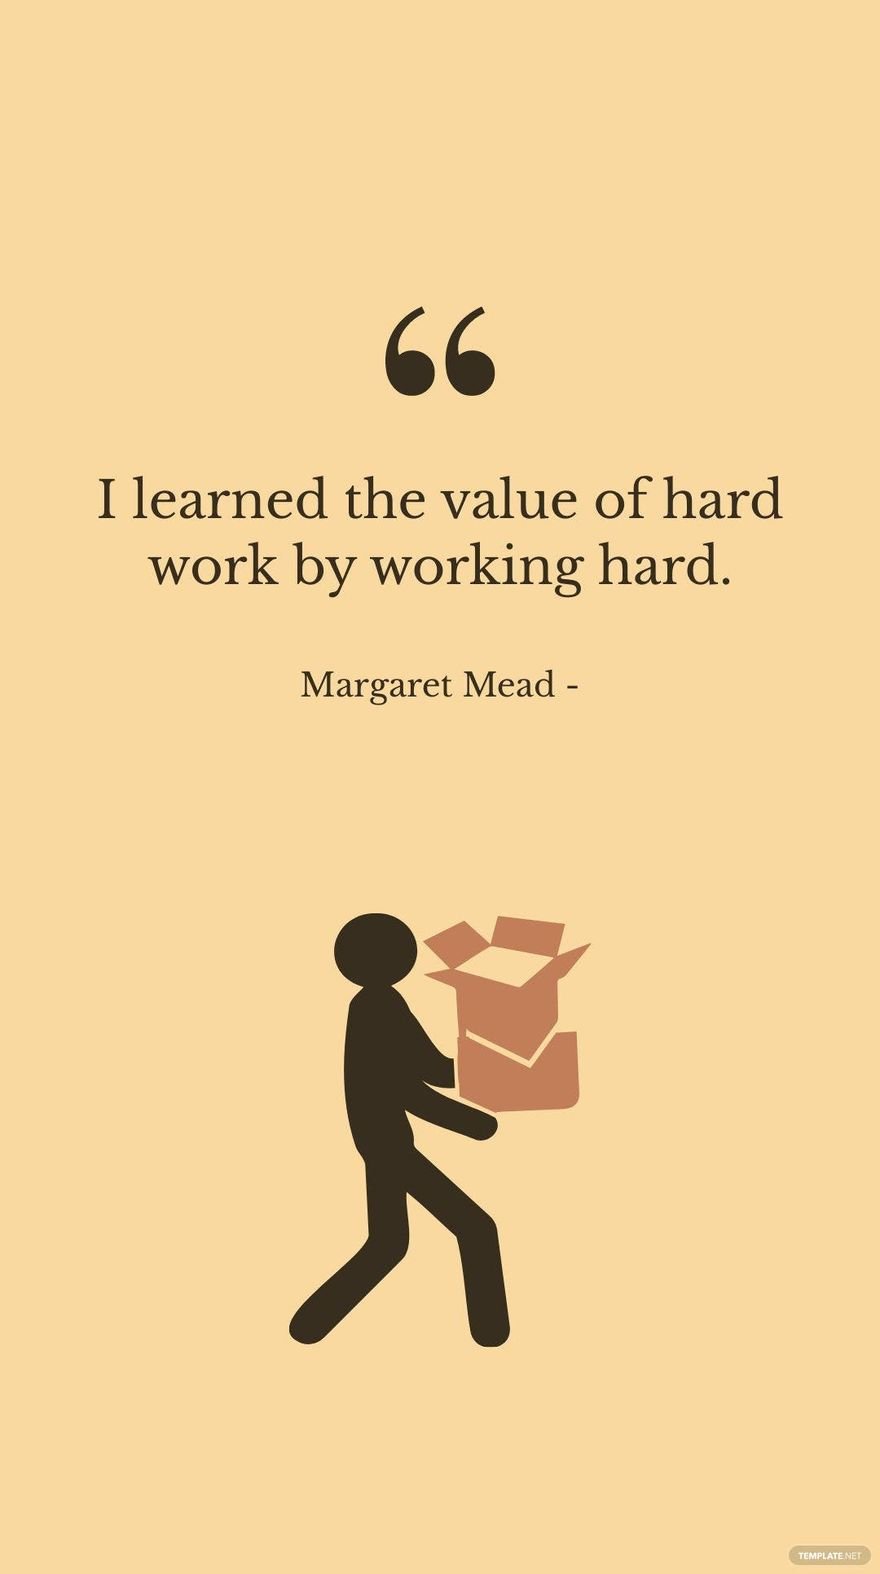 Free Margaret Mead - I learned the value of hard work by working hard. in JPG